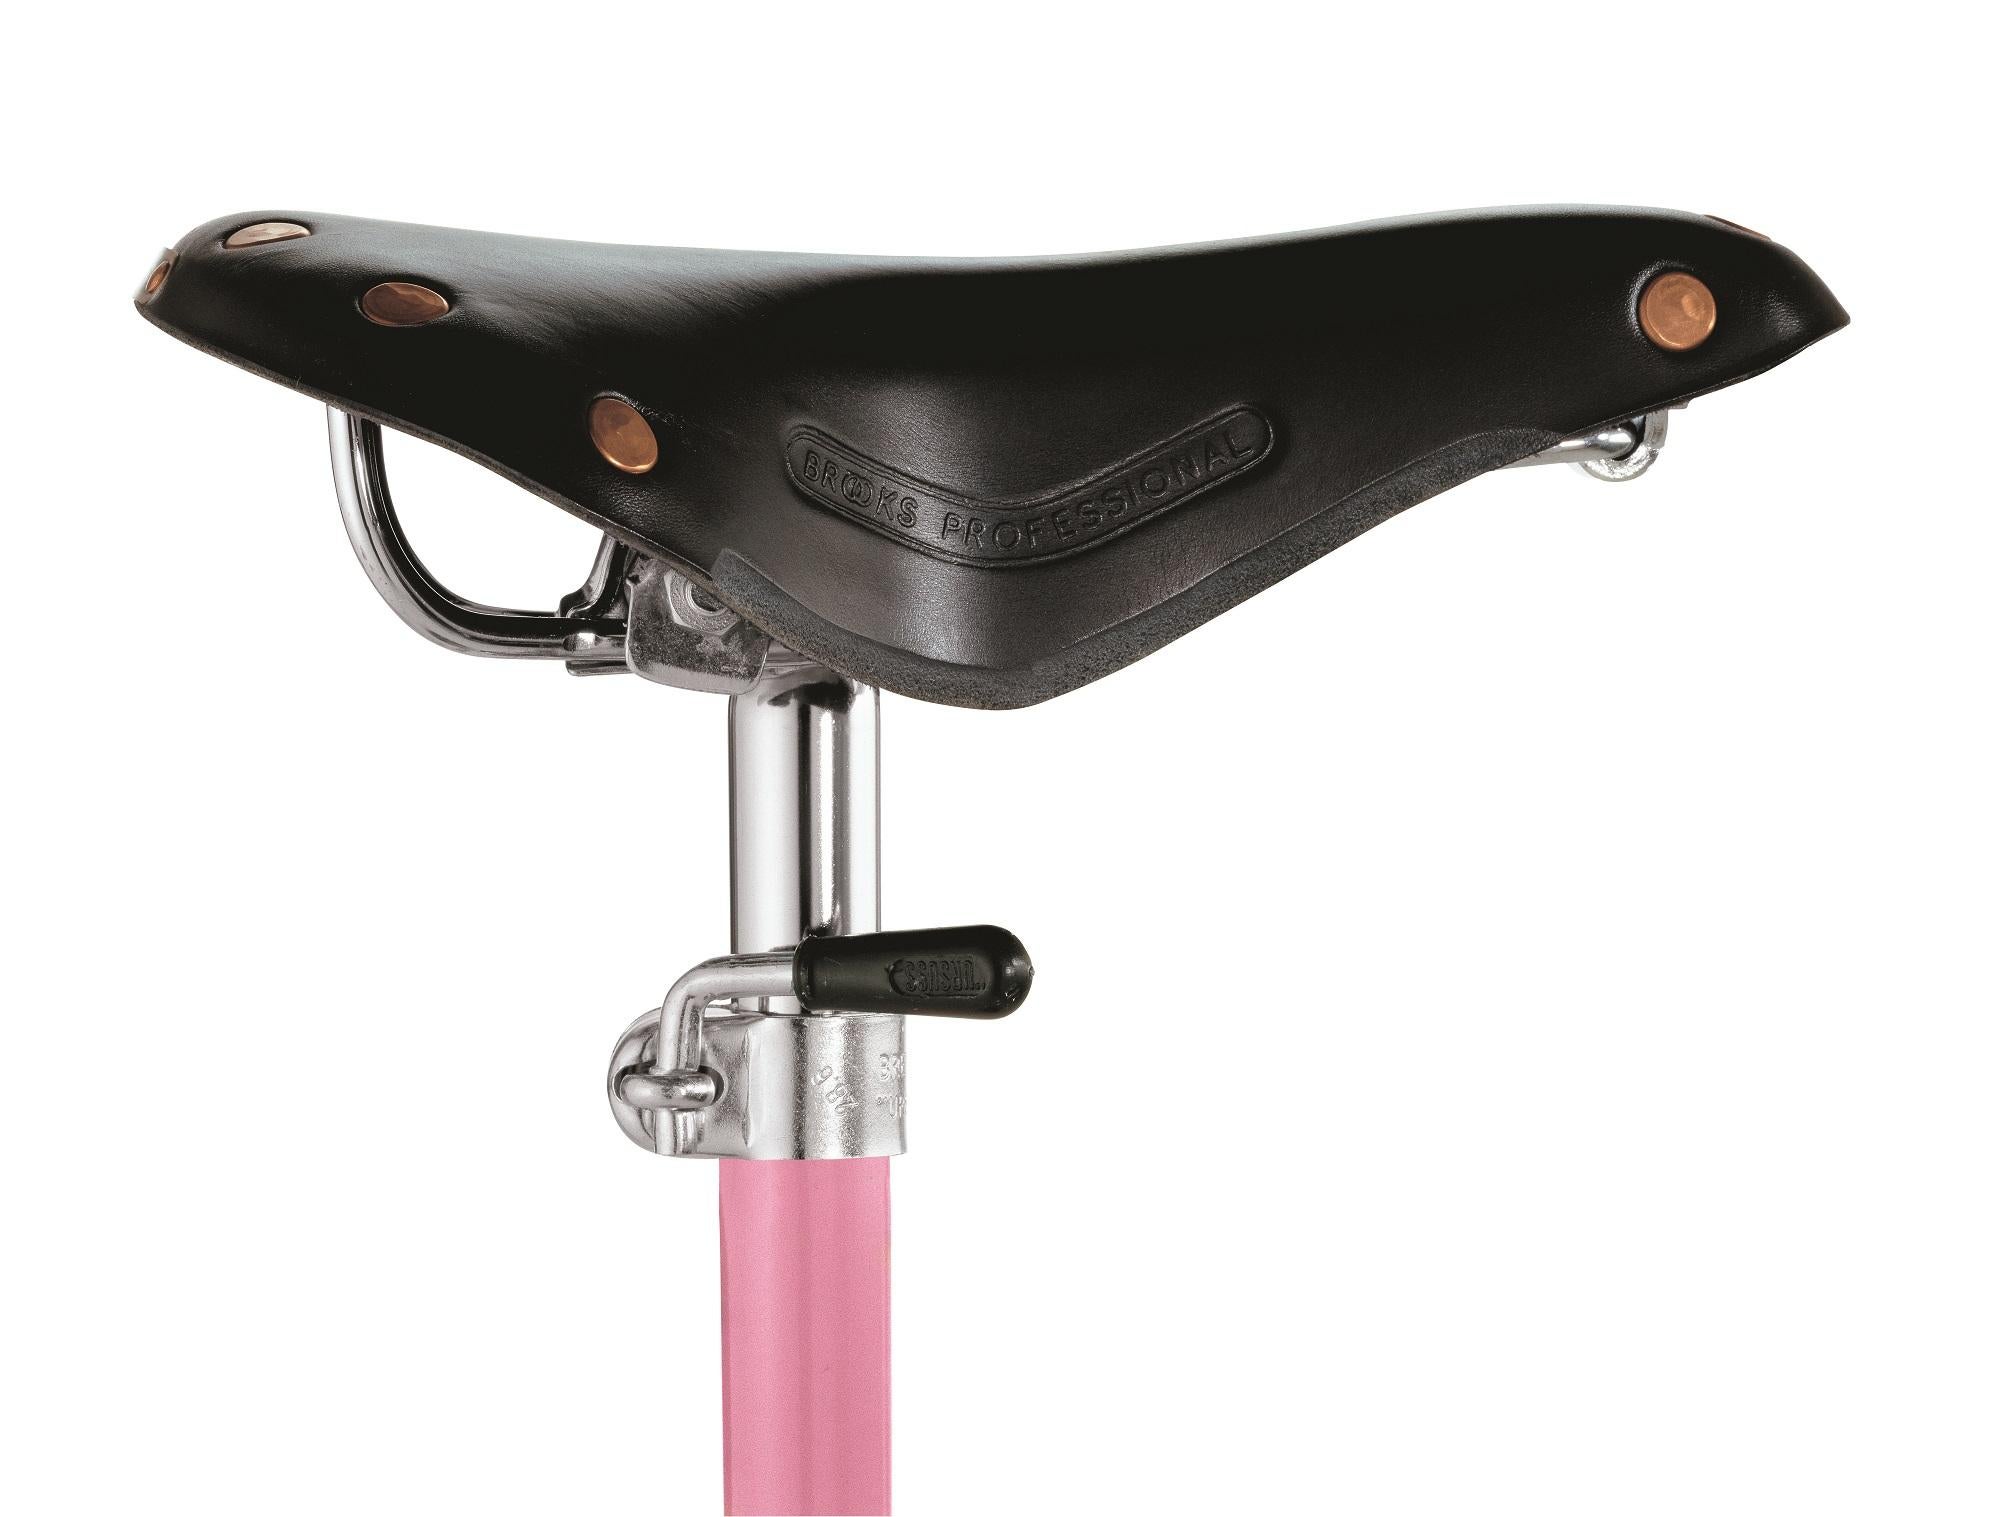 Zanotta Sella Seat in Pink Lacquered Steel Column with Cast-iron Base by Achille and Pier Giacomo Castiglioni

Black saddle of racing bicycle, pink lacquered steel column. Cast-iron base.

Additional information:
Material: Steel, cast iron,